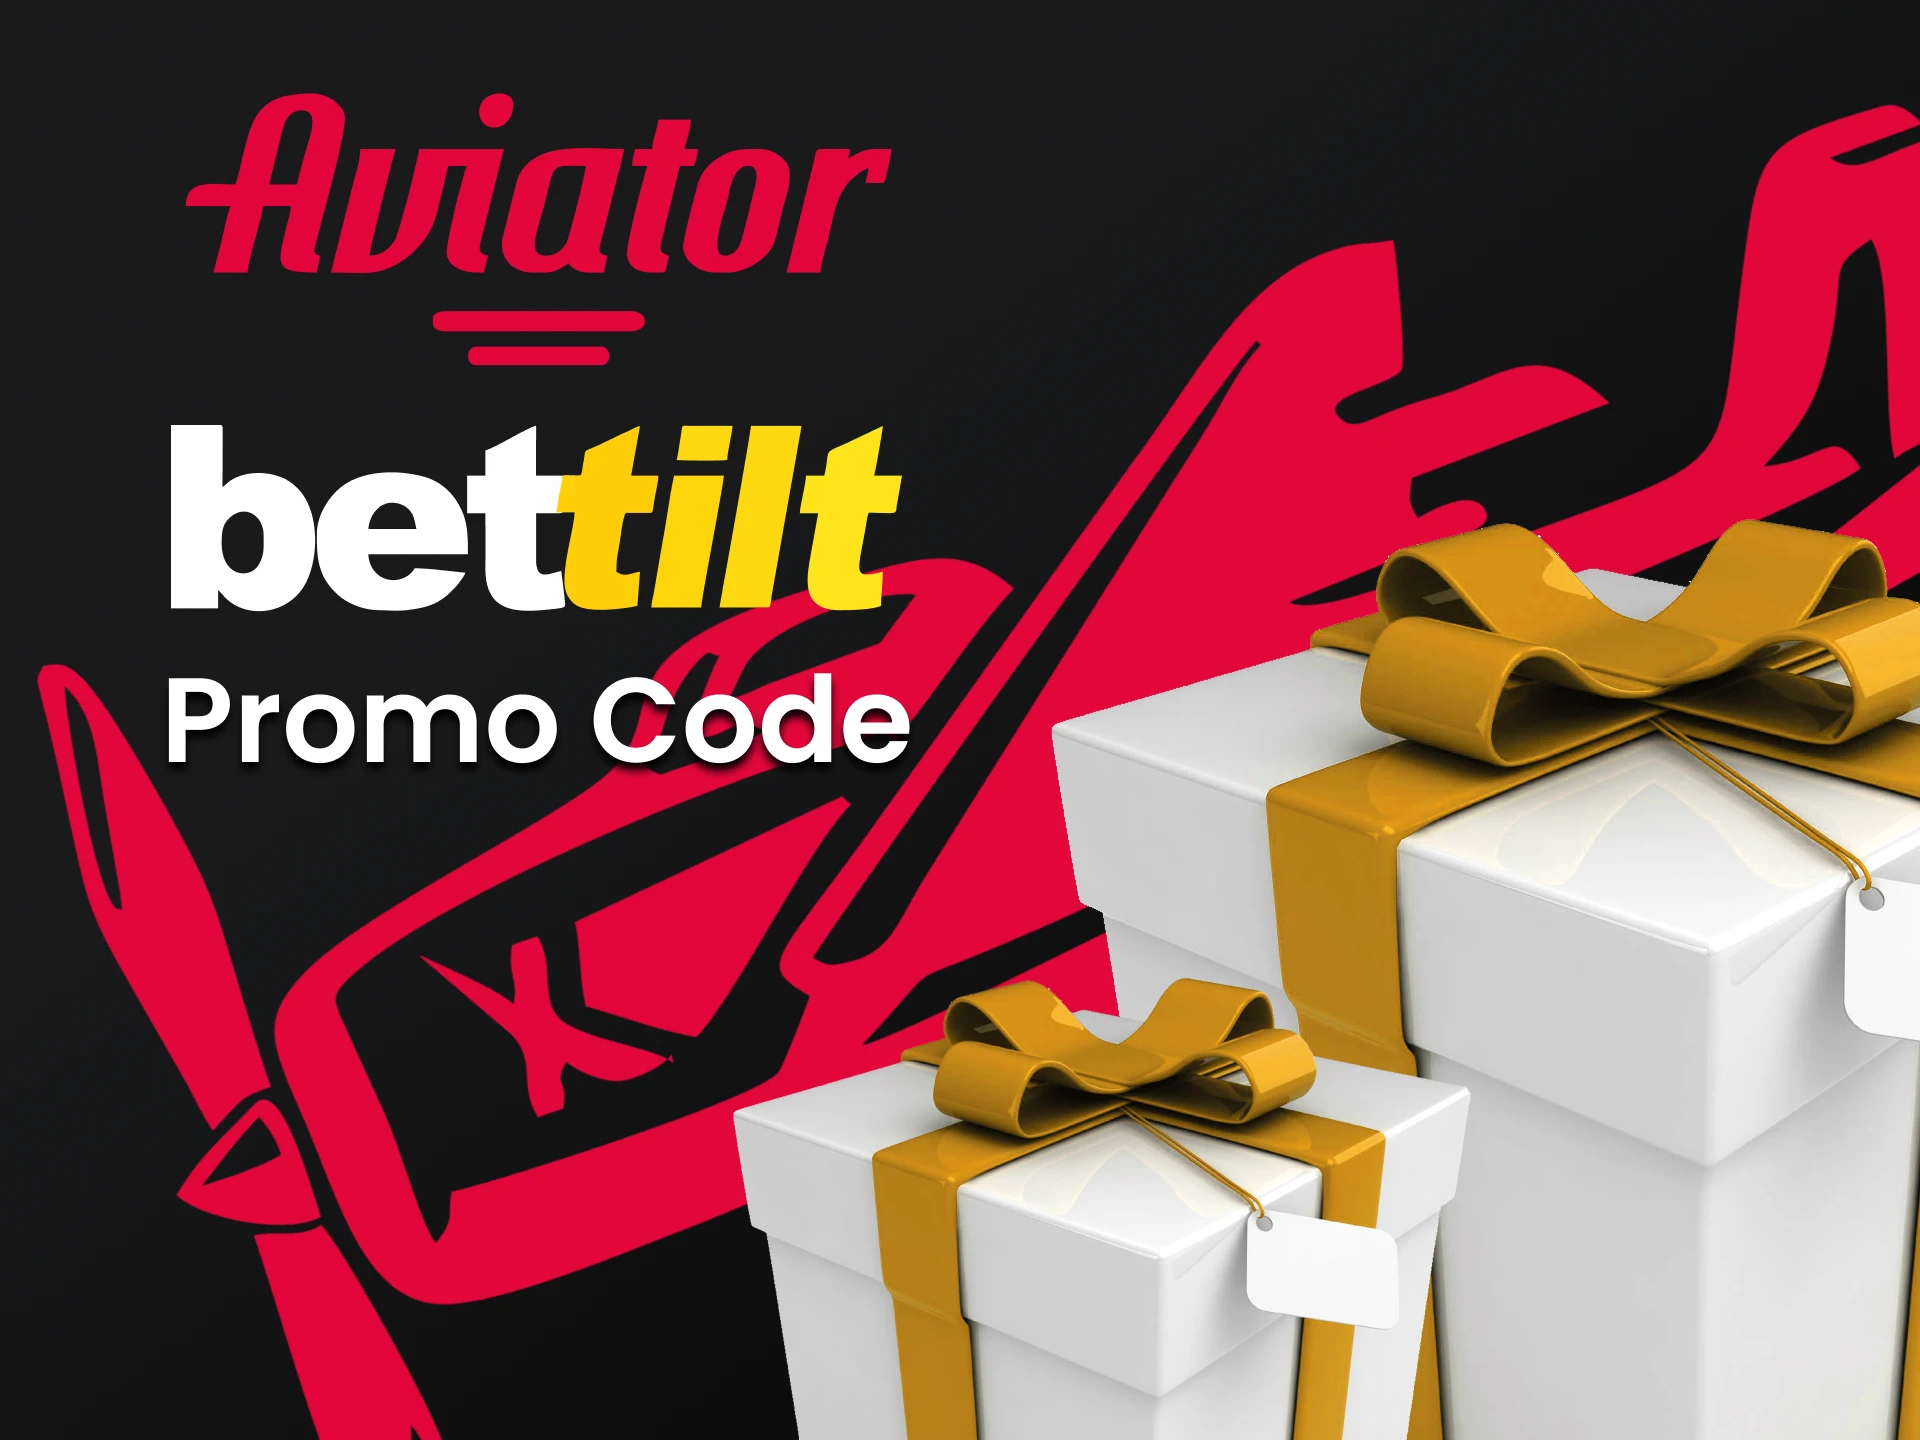 Enter the promo code to get an additional bonus for the Aviator from Bettilt.